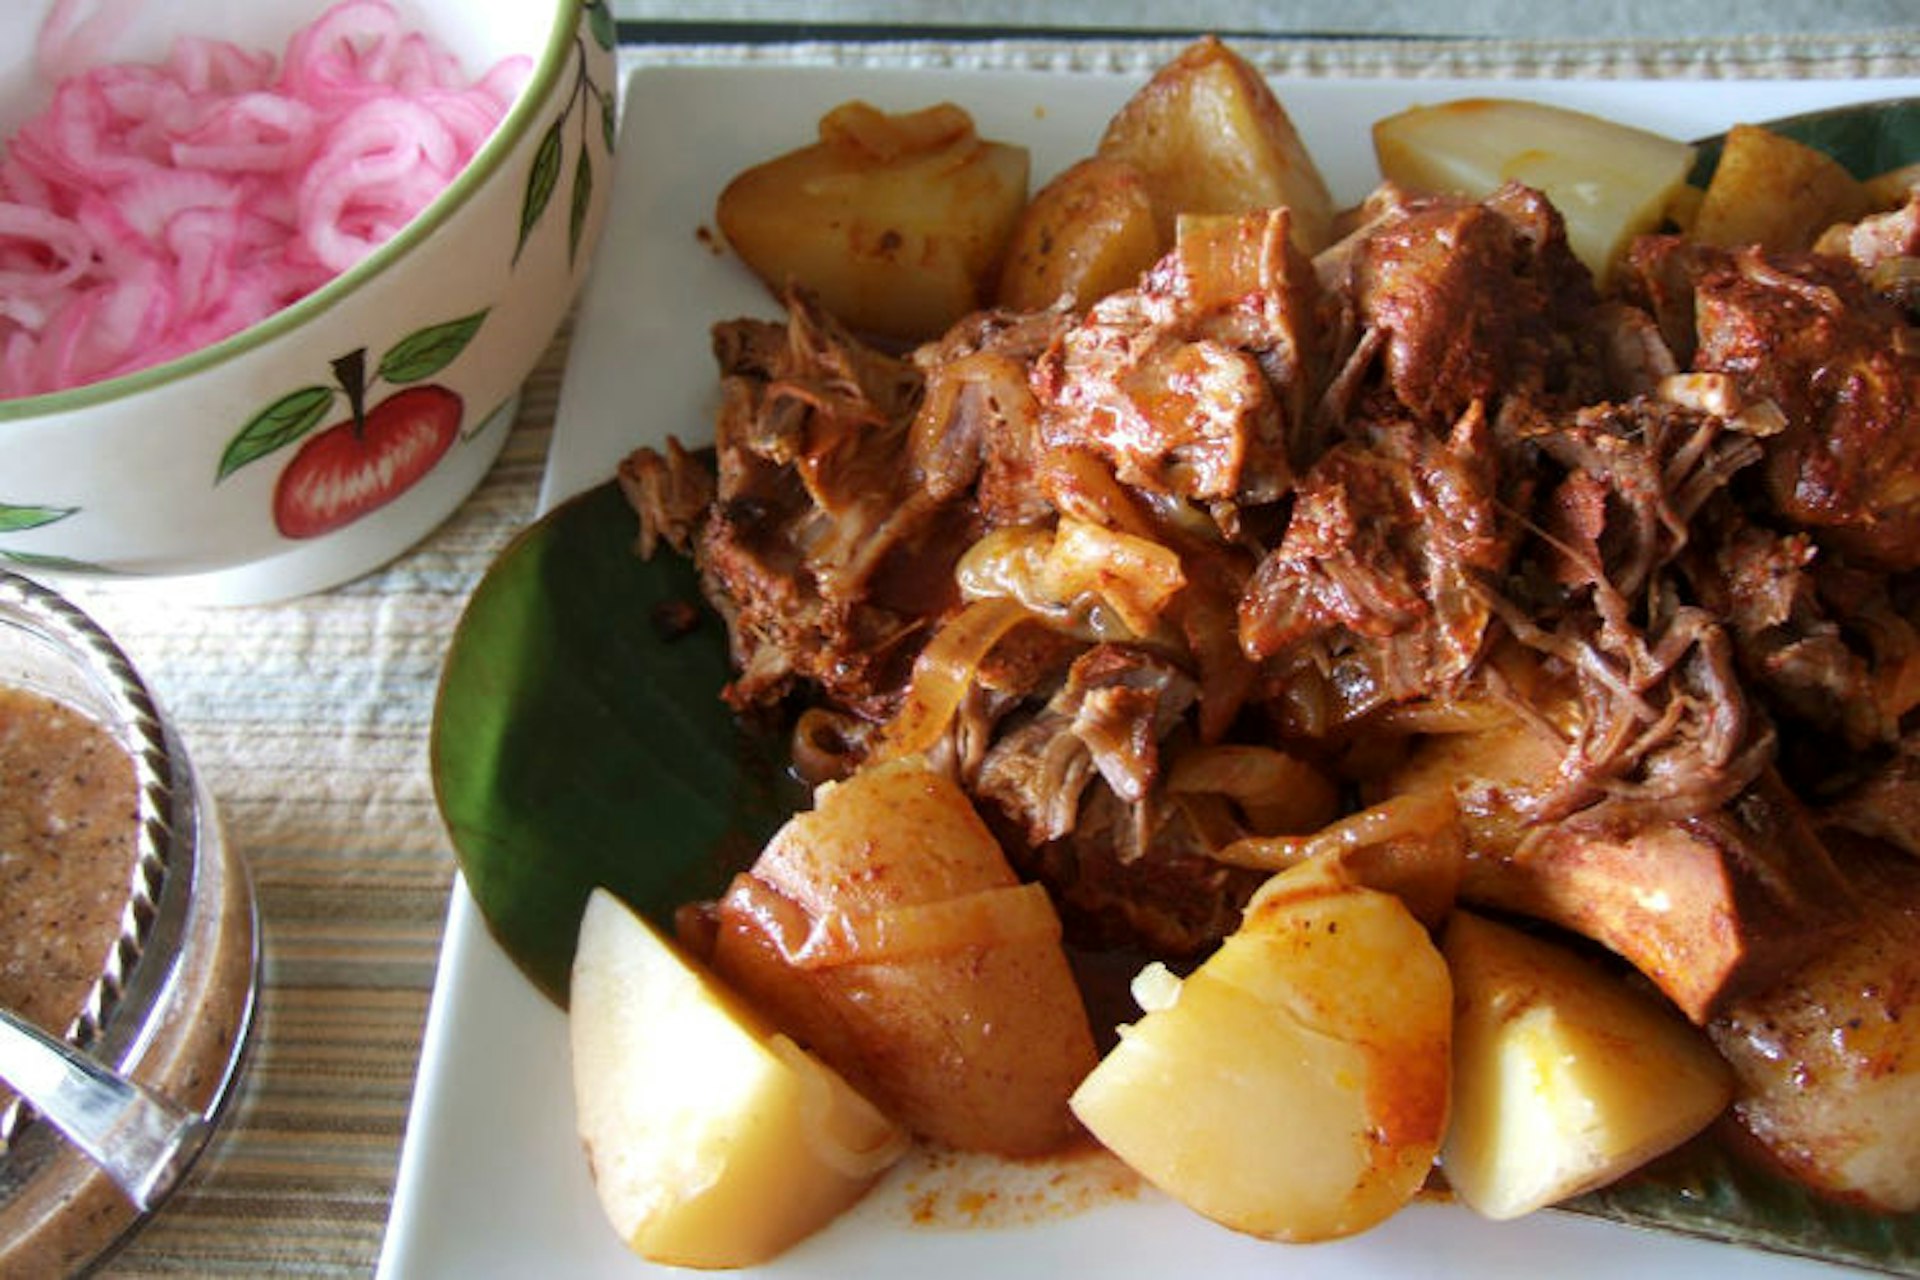 Cochinita pobil uses chilies. Image by Noonch / CC BY 2.0